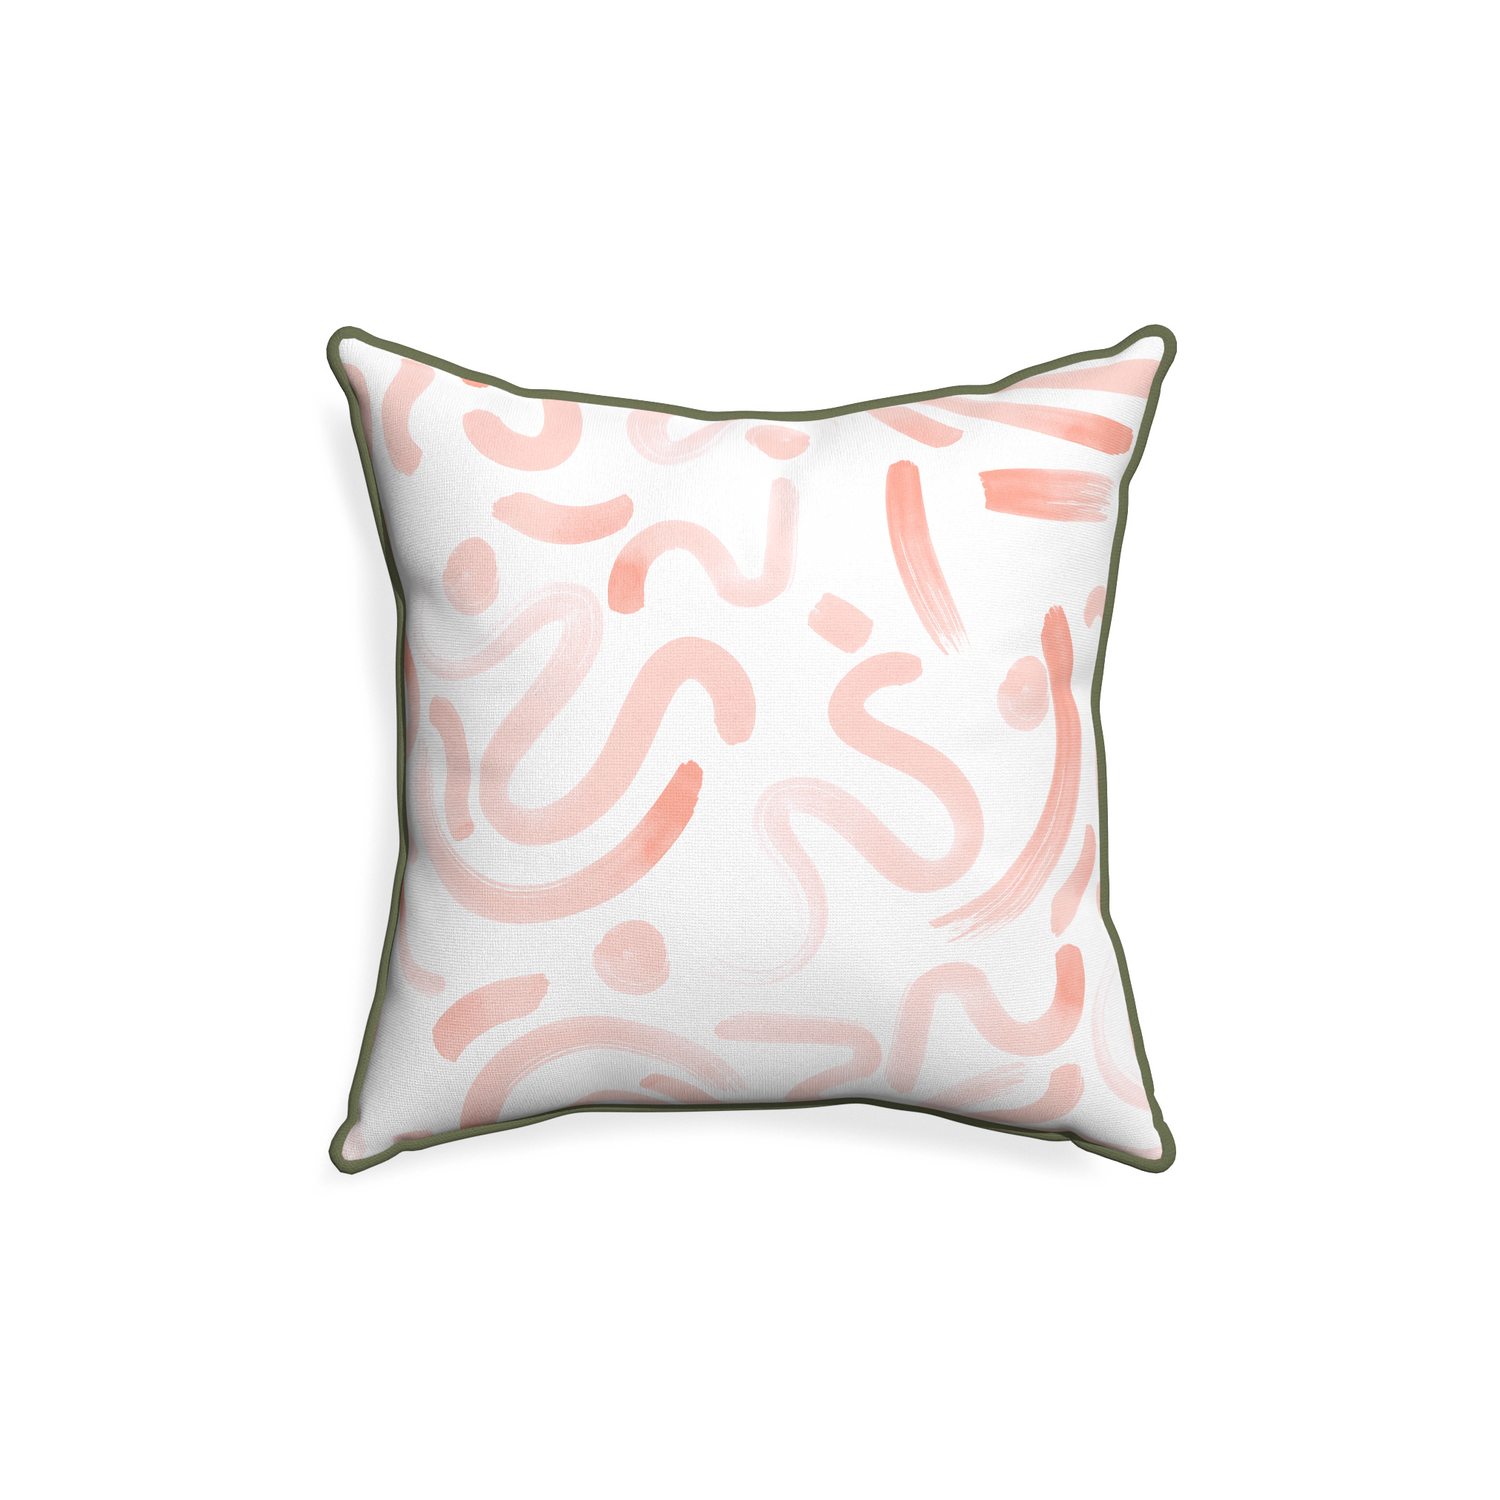 18-square hockney pink custom pillow with f piping on white background